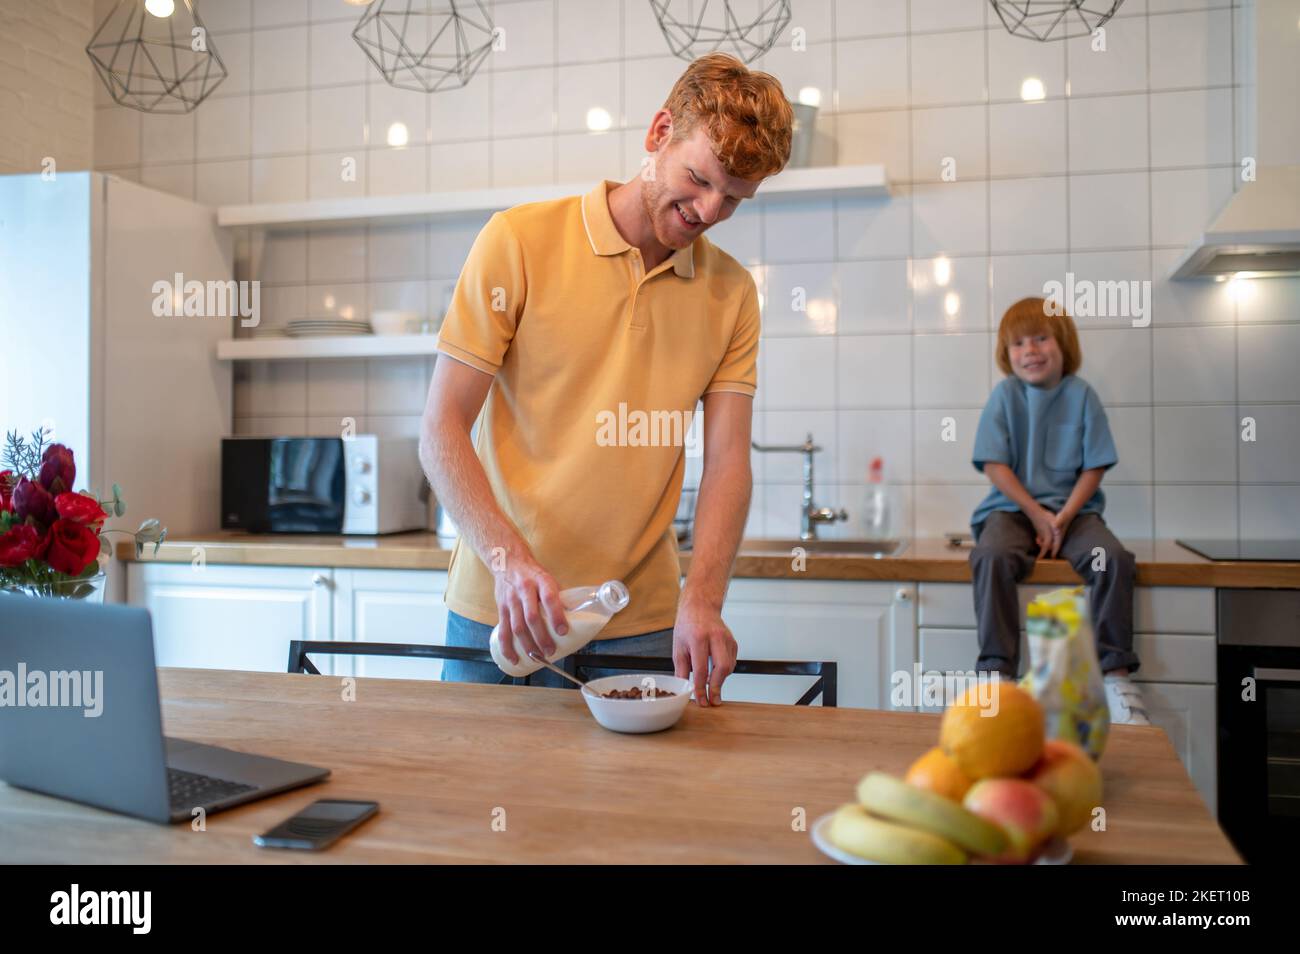 Ginger man with a bottle of milk in hands getting ready the breakfast for his son Stock Photo